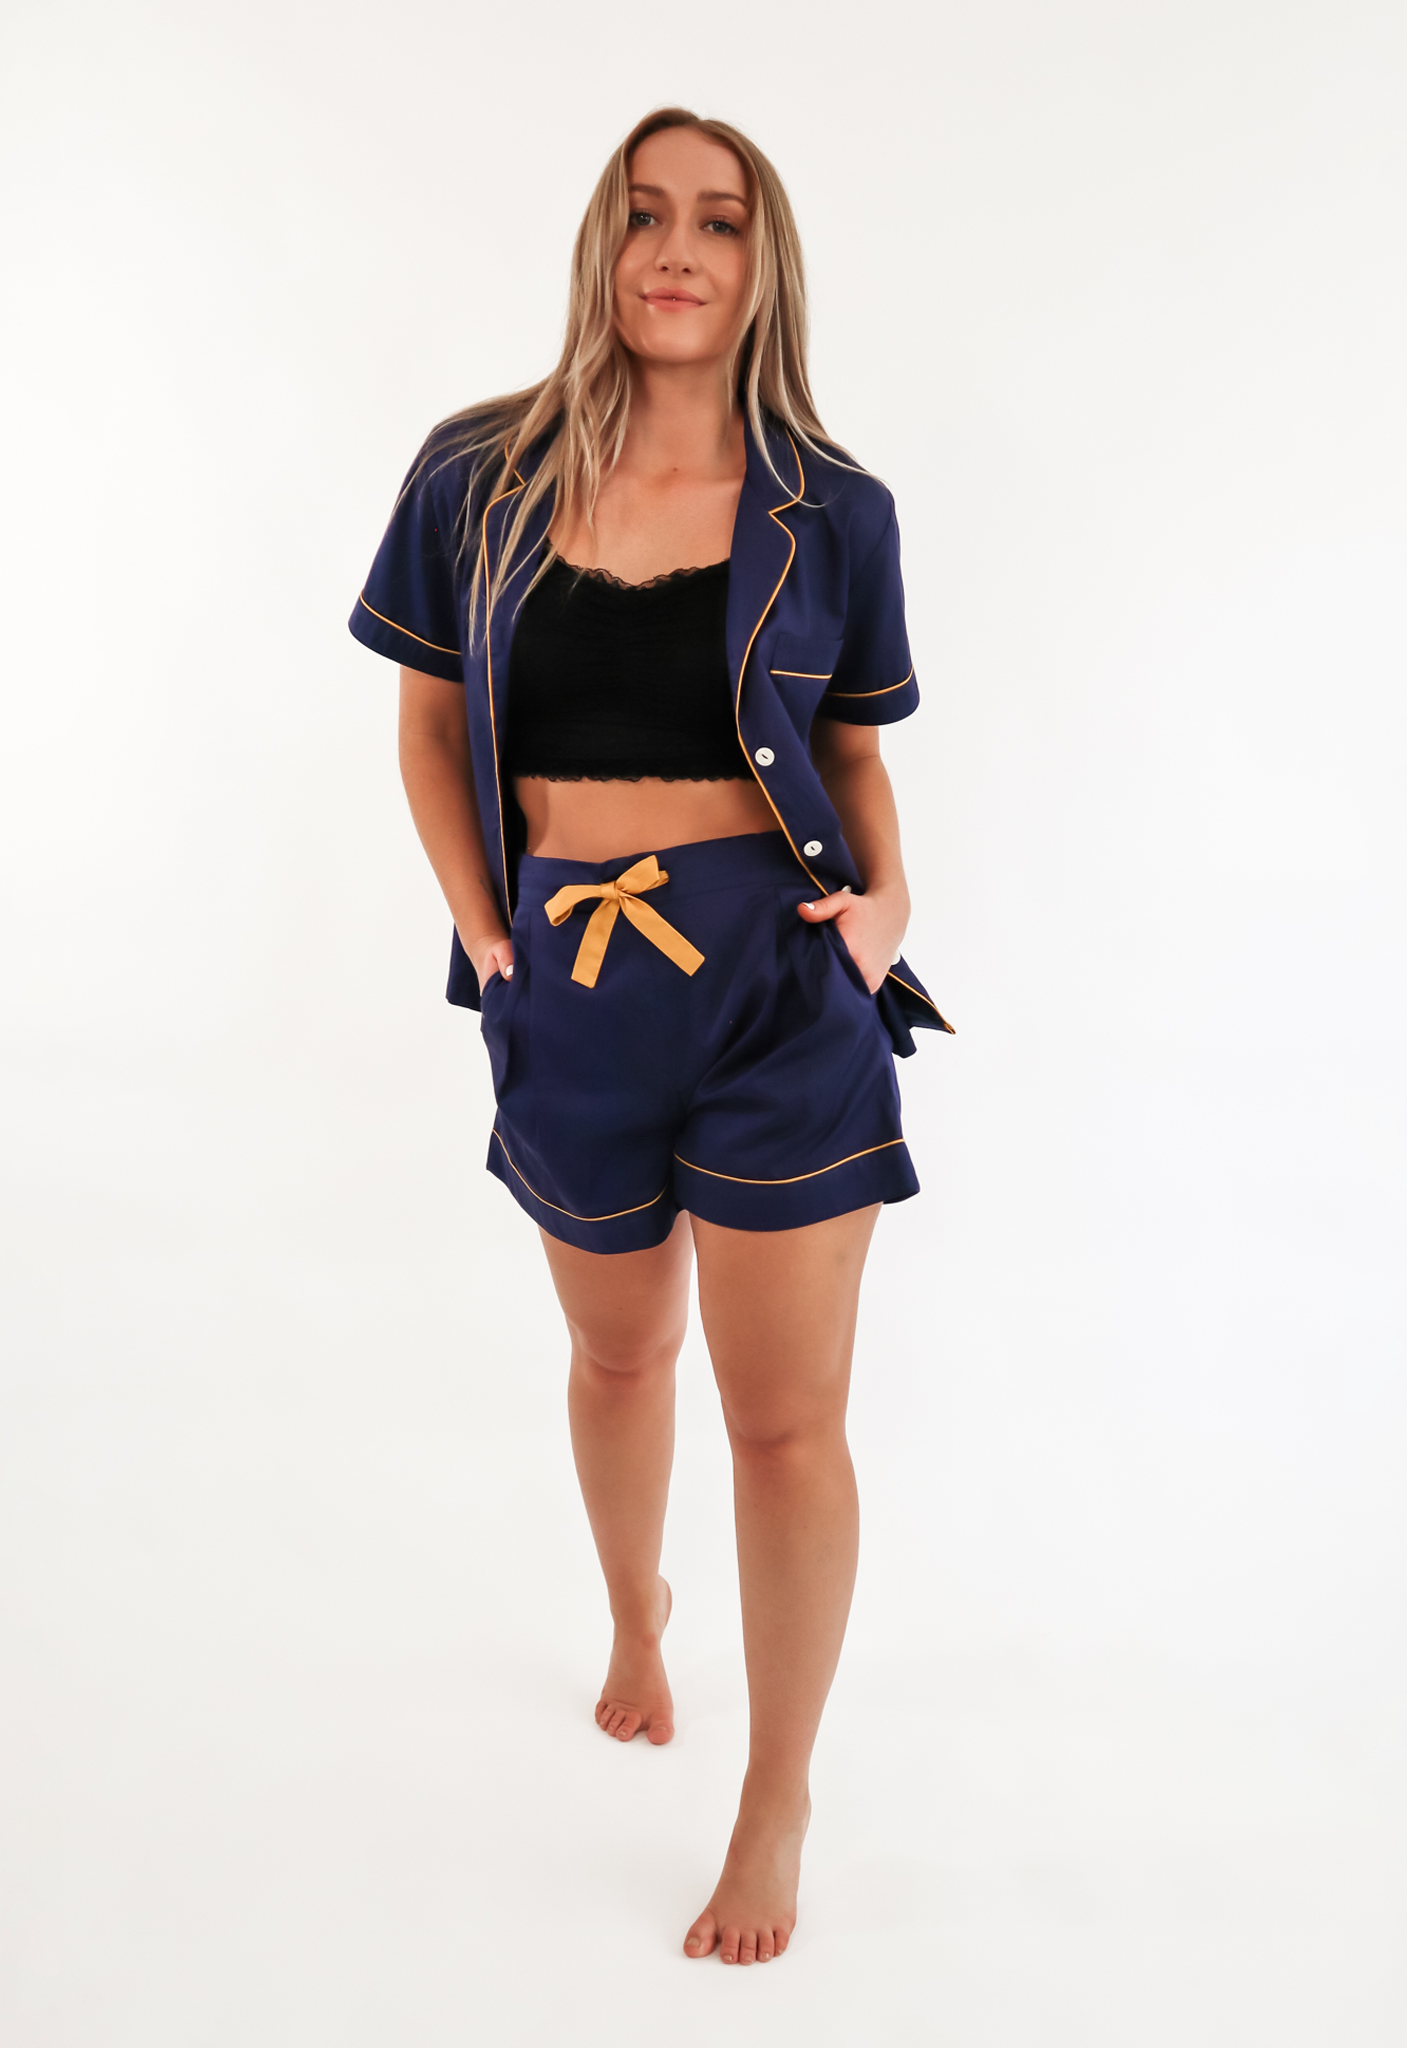 Short navy and yellow pyjama set with top unbuttoned to show black lace bralette.